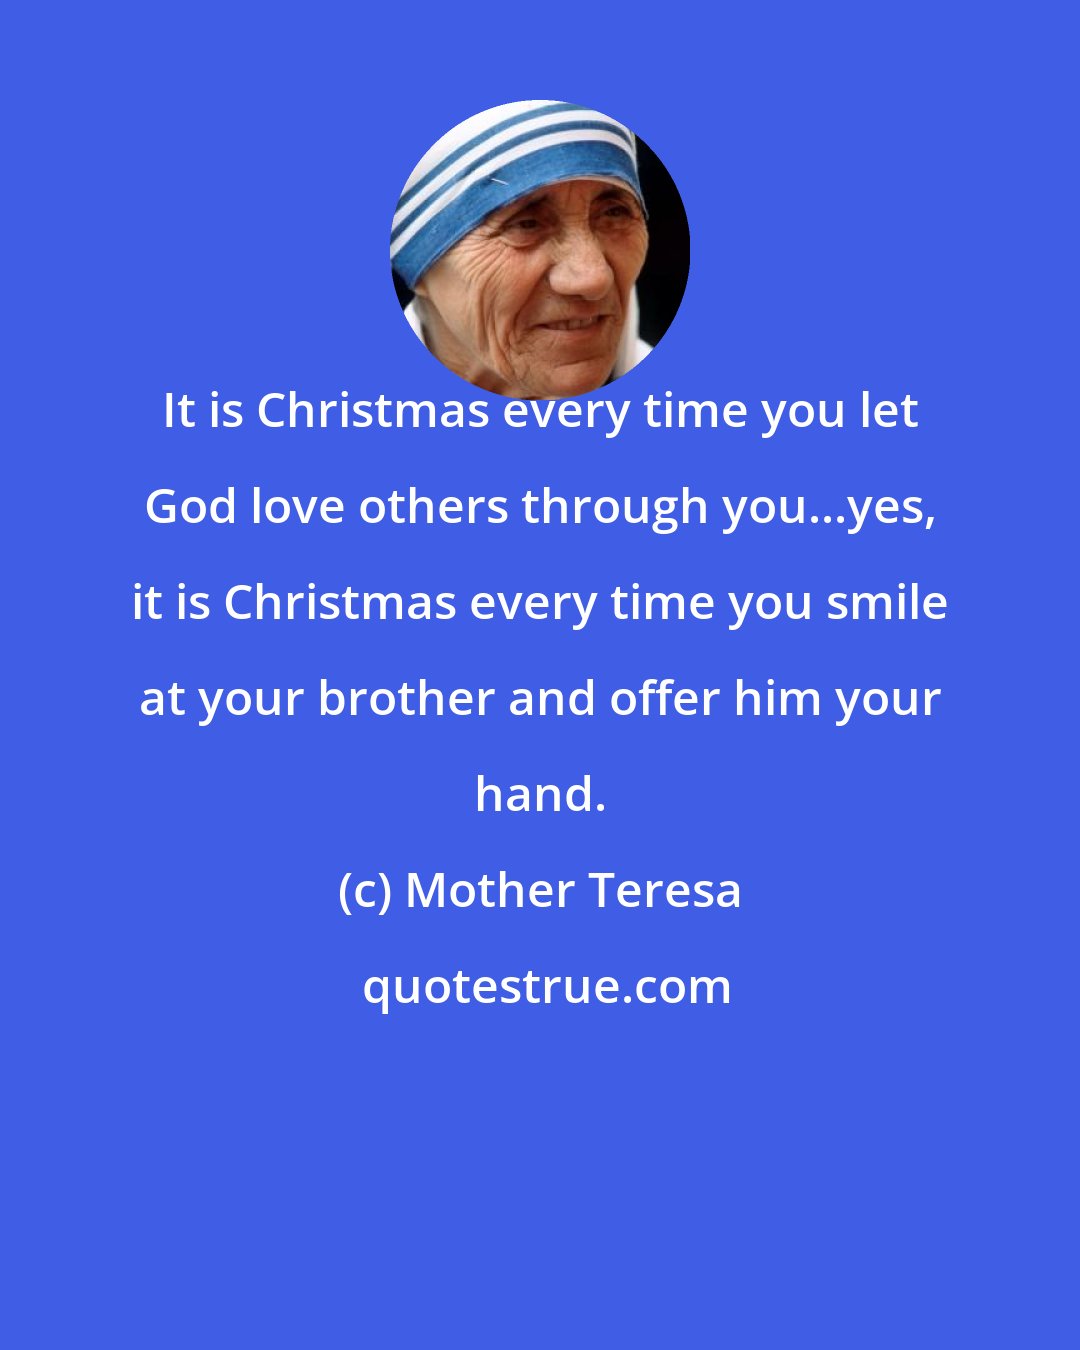 Mother Teresa: It is Christmas every time you let God love others through you...yes, it is Christmas every time you smile at your brother and offer him your hand.